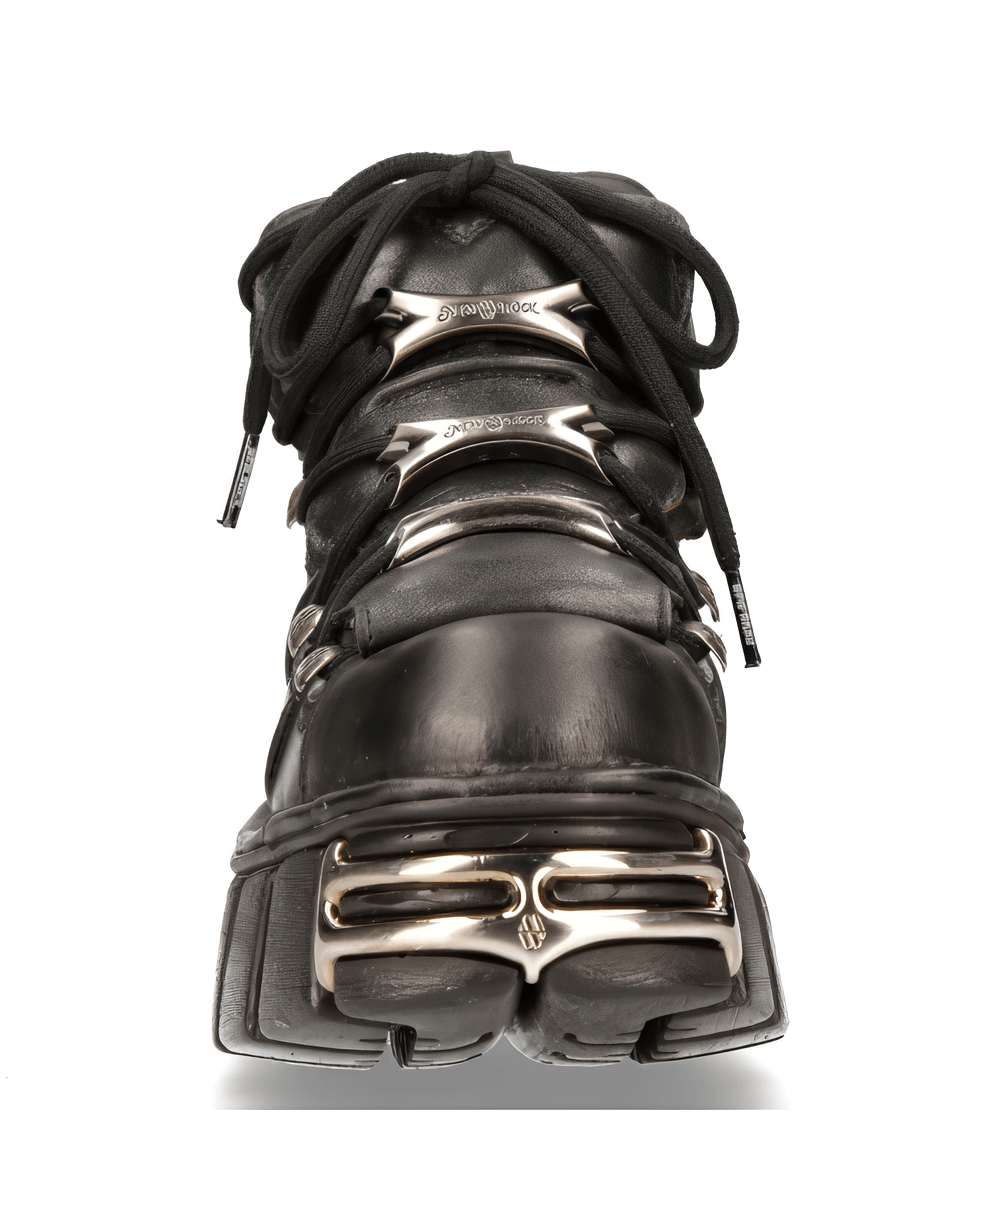 NEW ROCK Black Gothic Ankle Boots with Metallic Accents